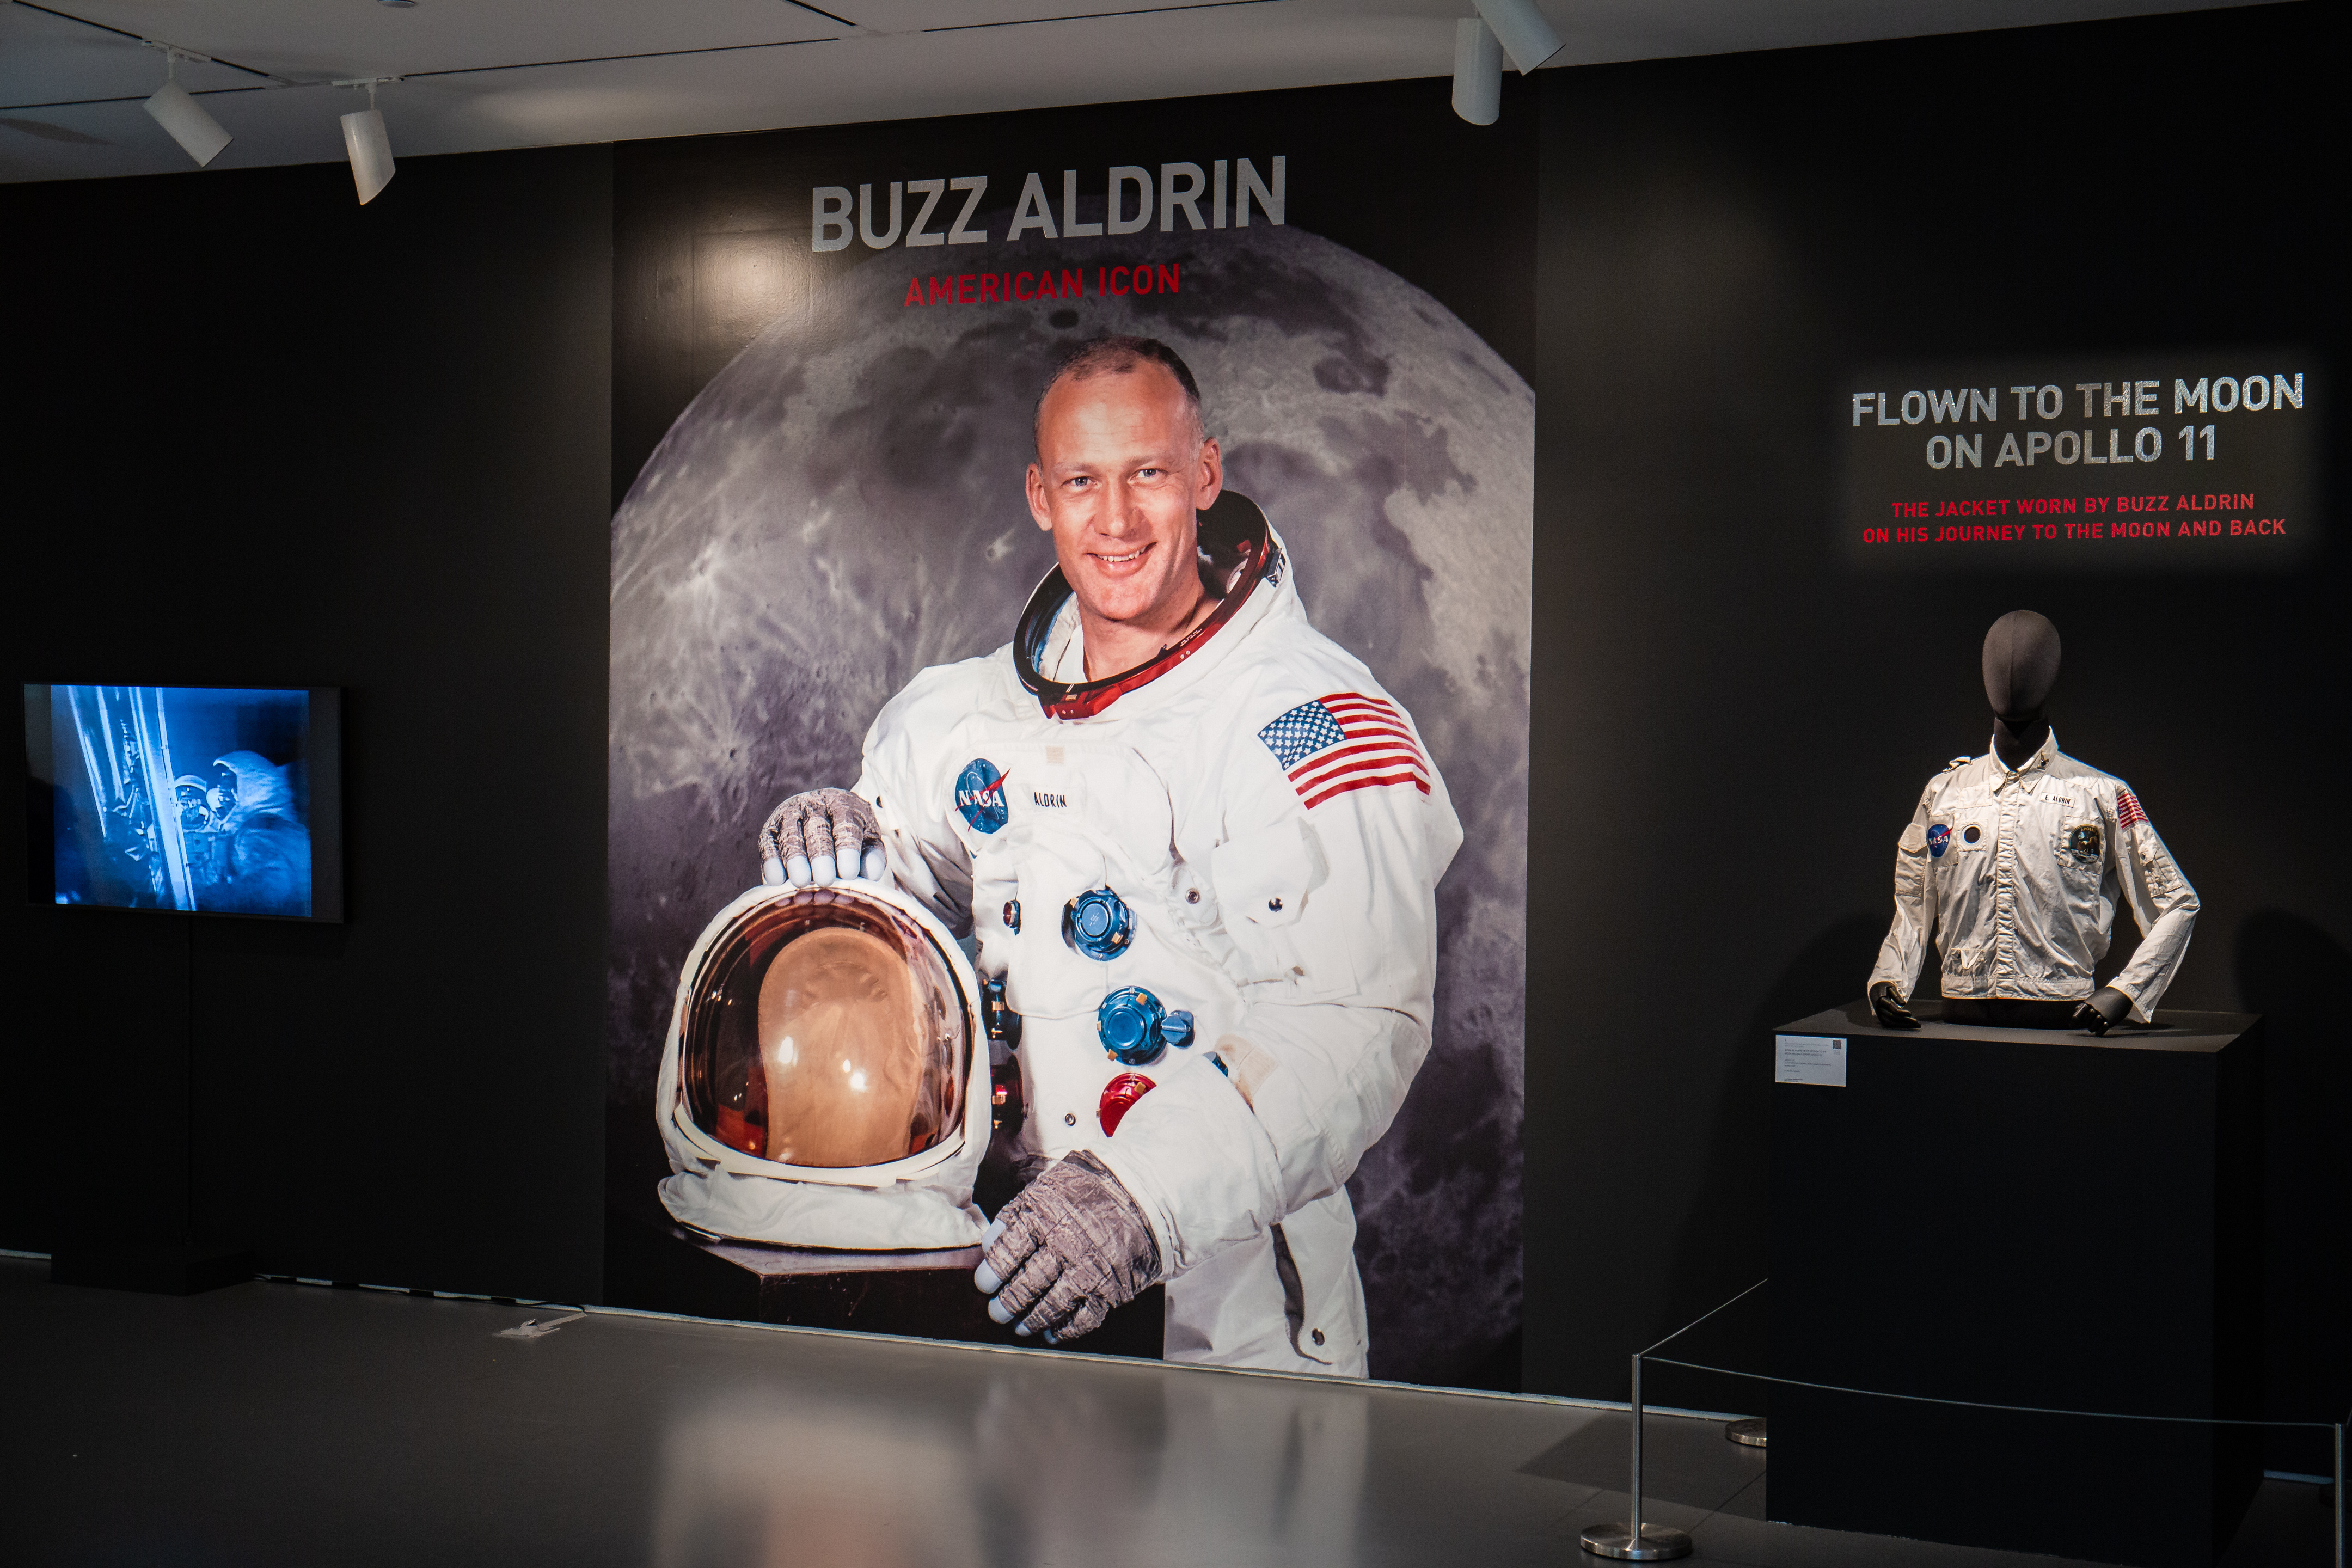 The inflight jacket worn by Buzz Aldrin is the only space-flown garment from the Apollo 11 mission ever made available for private ownership. Image courtesy of Sotheby’s